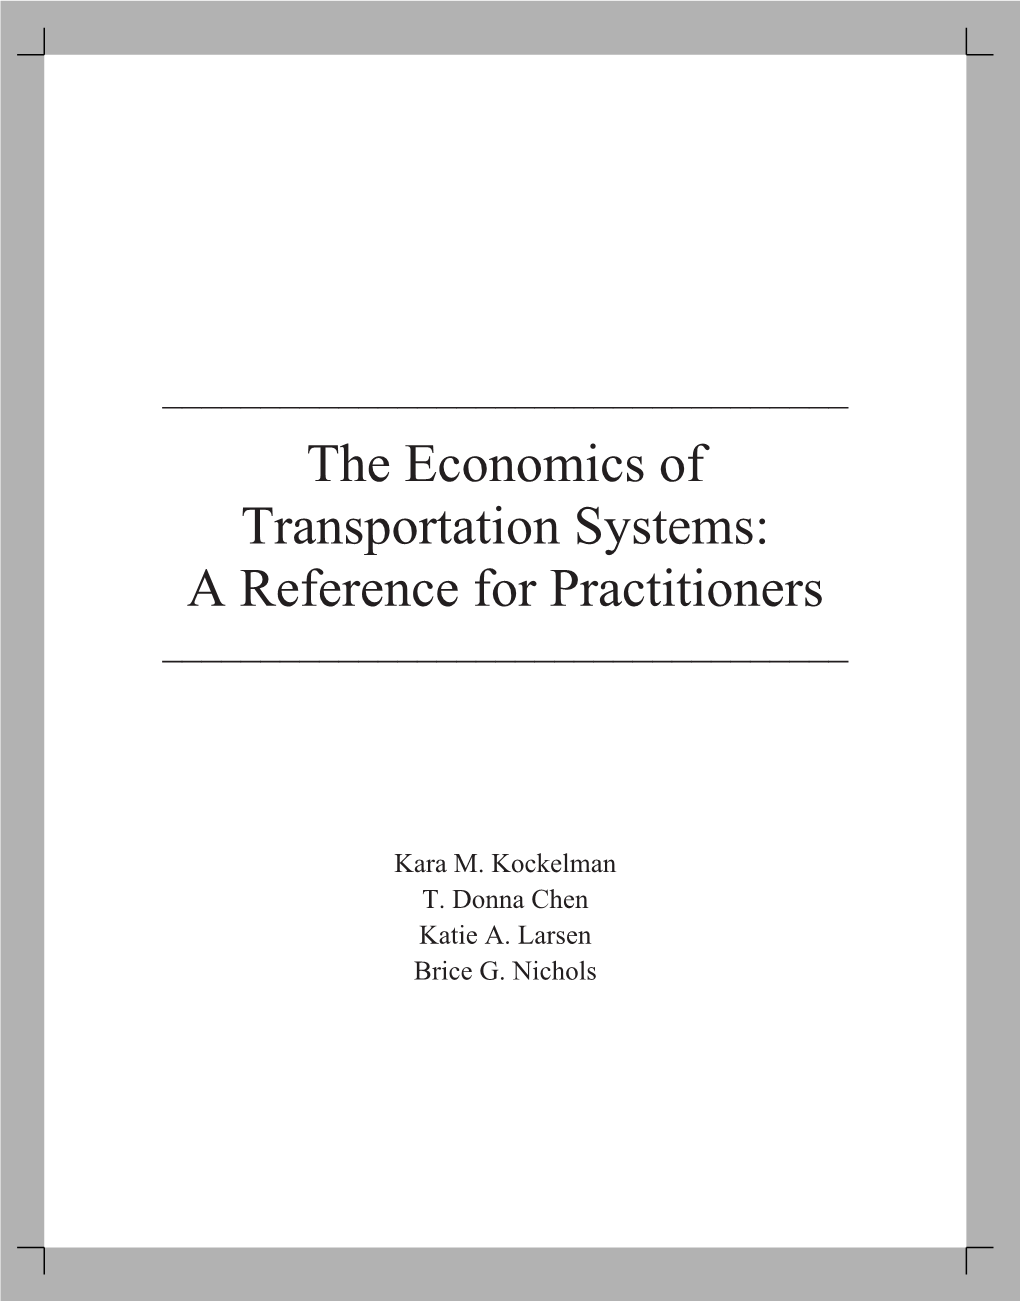 The Economics of Transportation Systems: a Reference for Practitioners Copyright ©2013 by Kara M